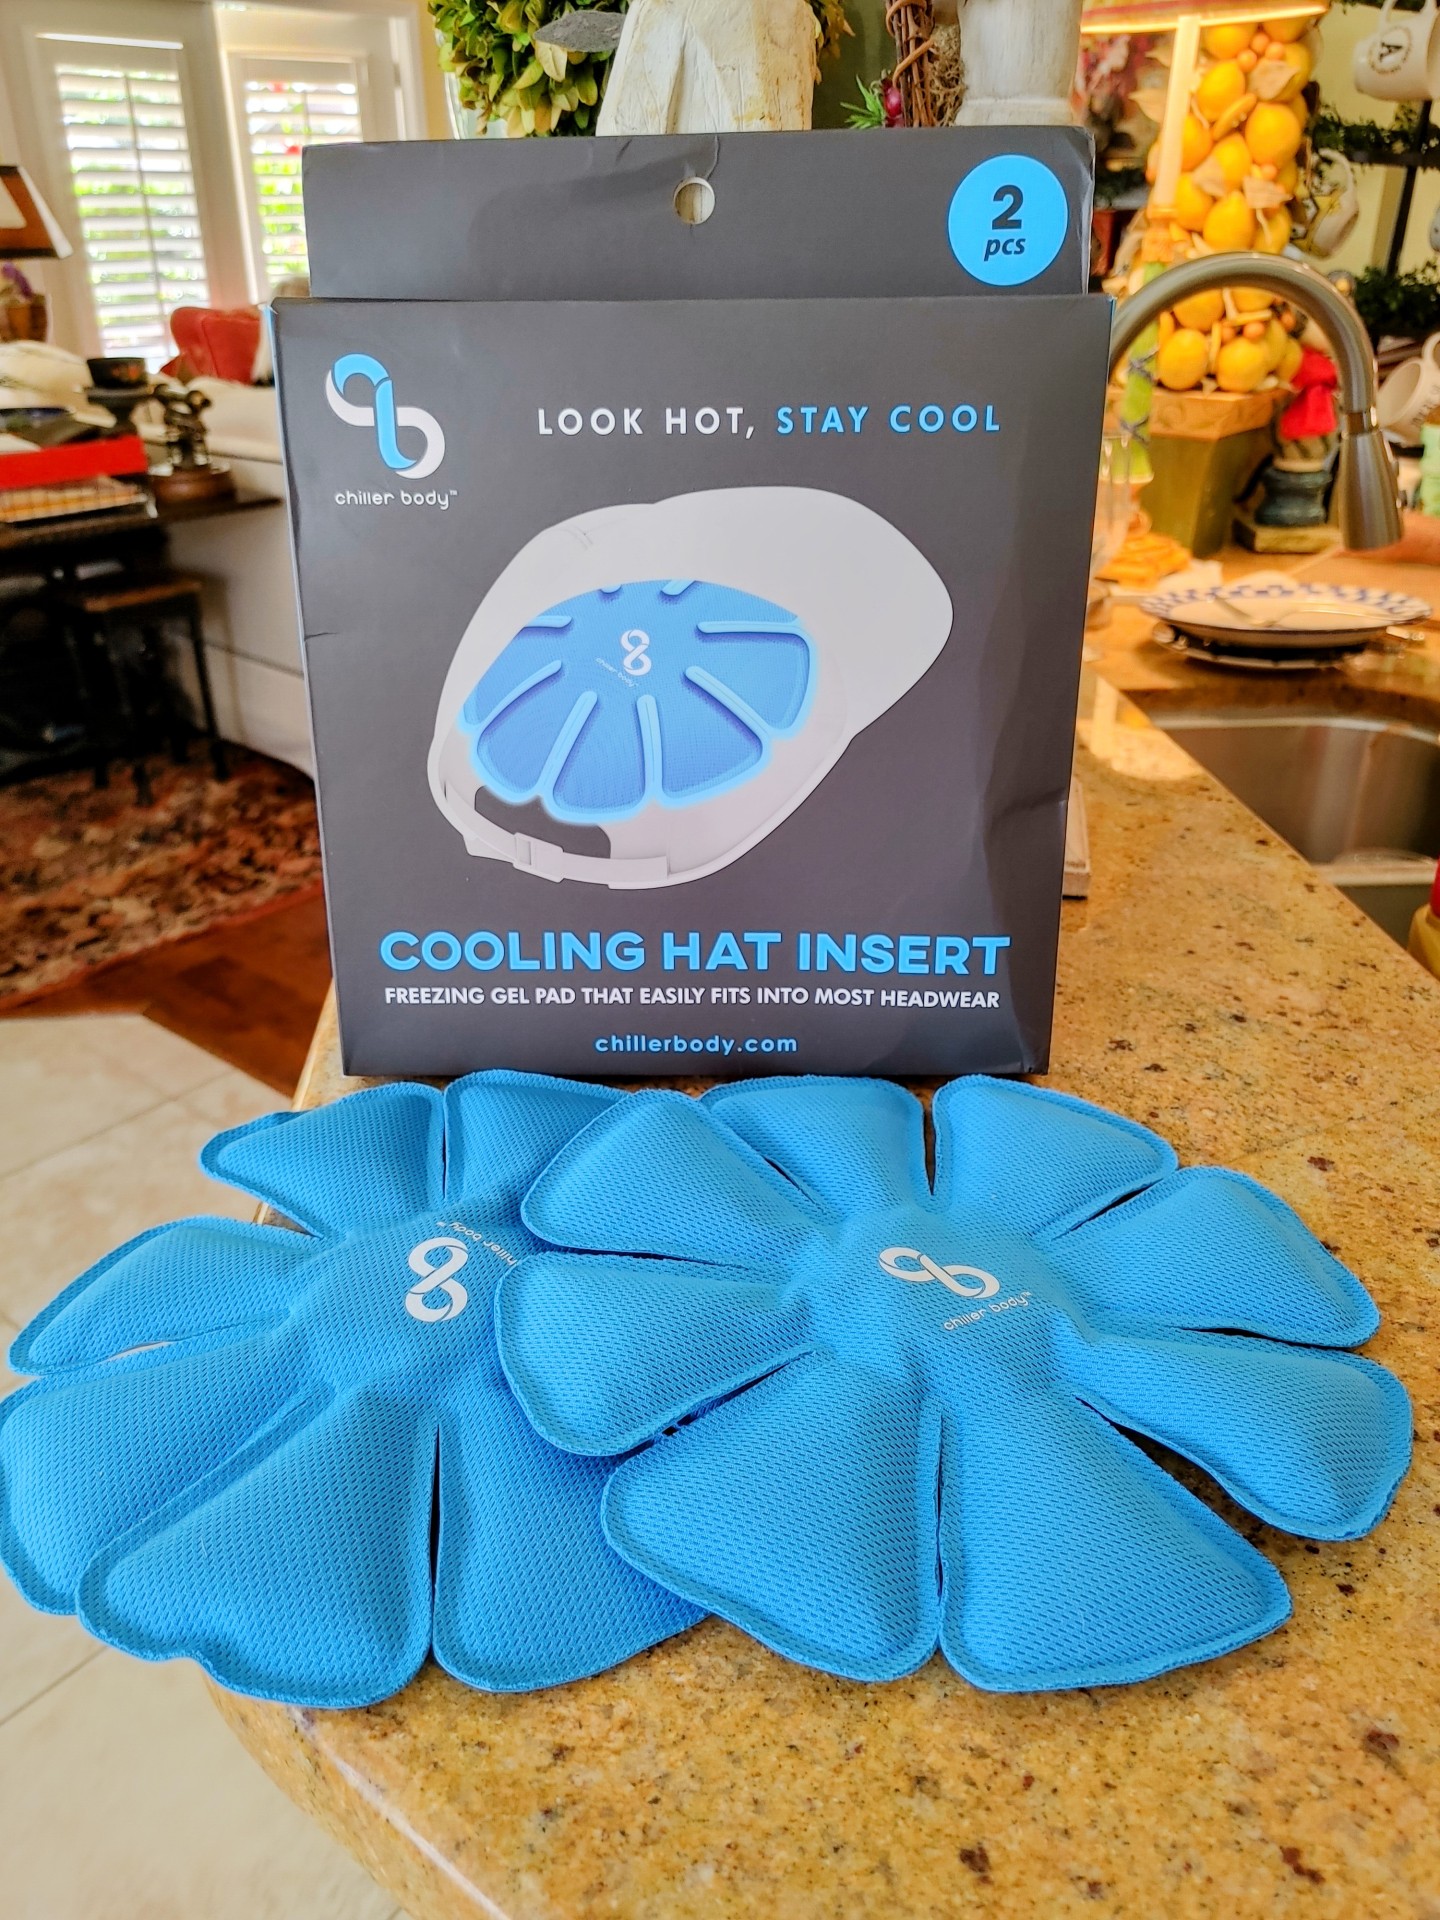 New Cooling Gadget a Hot Summer Find for F&#038;B Purveyors